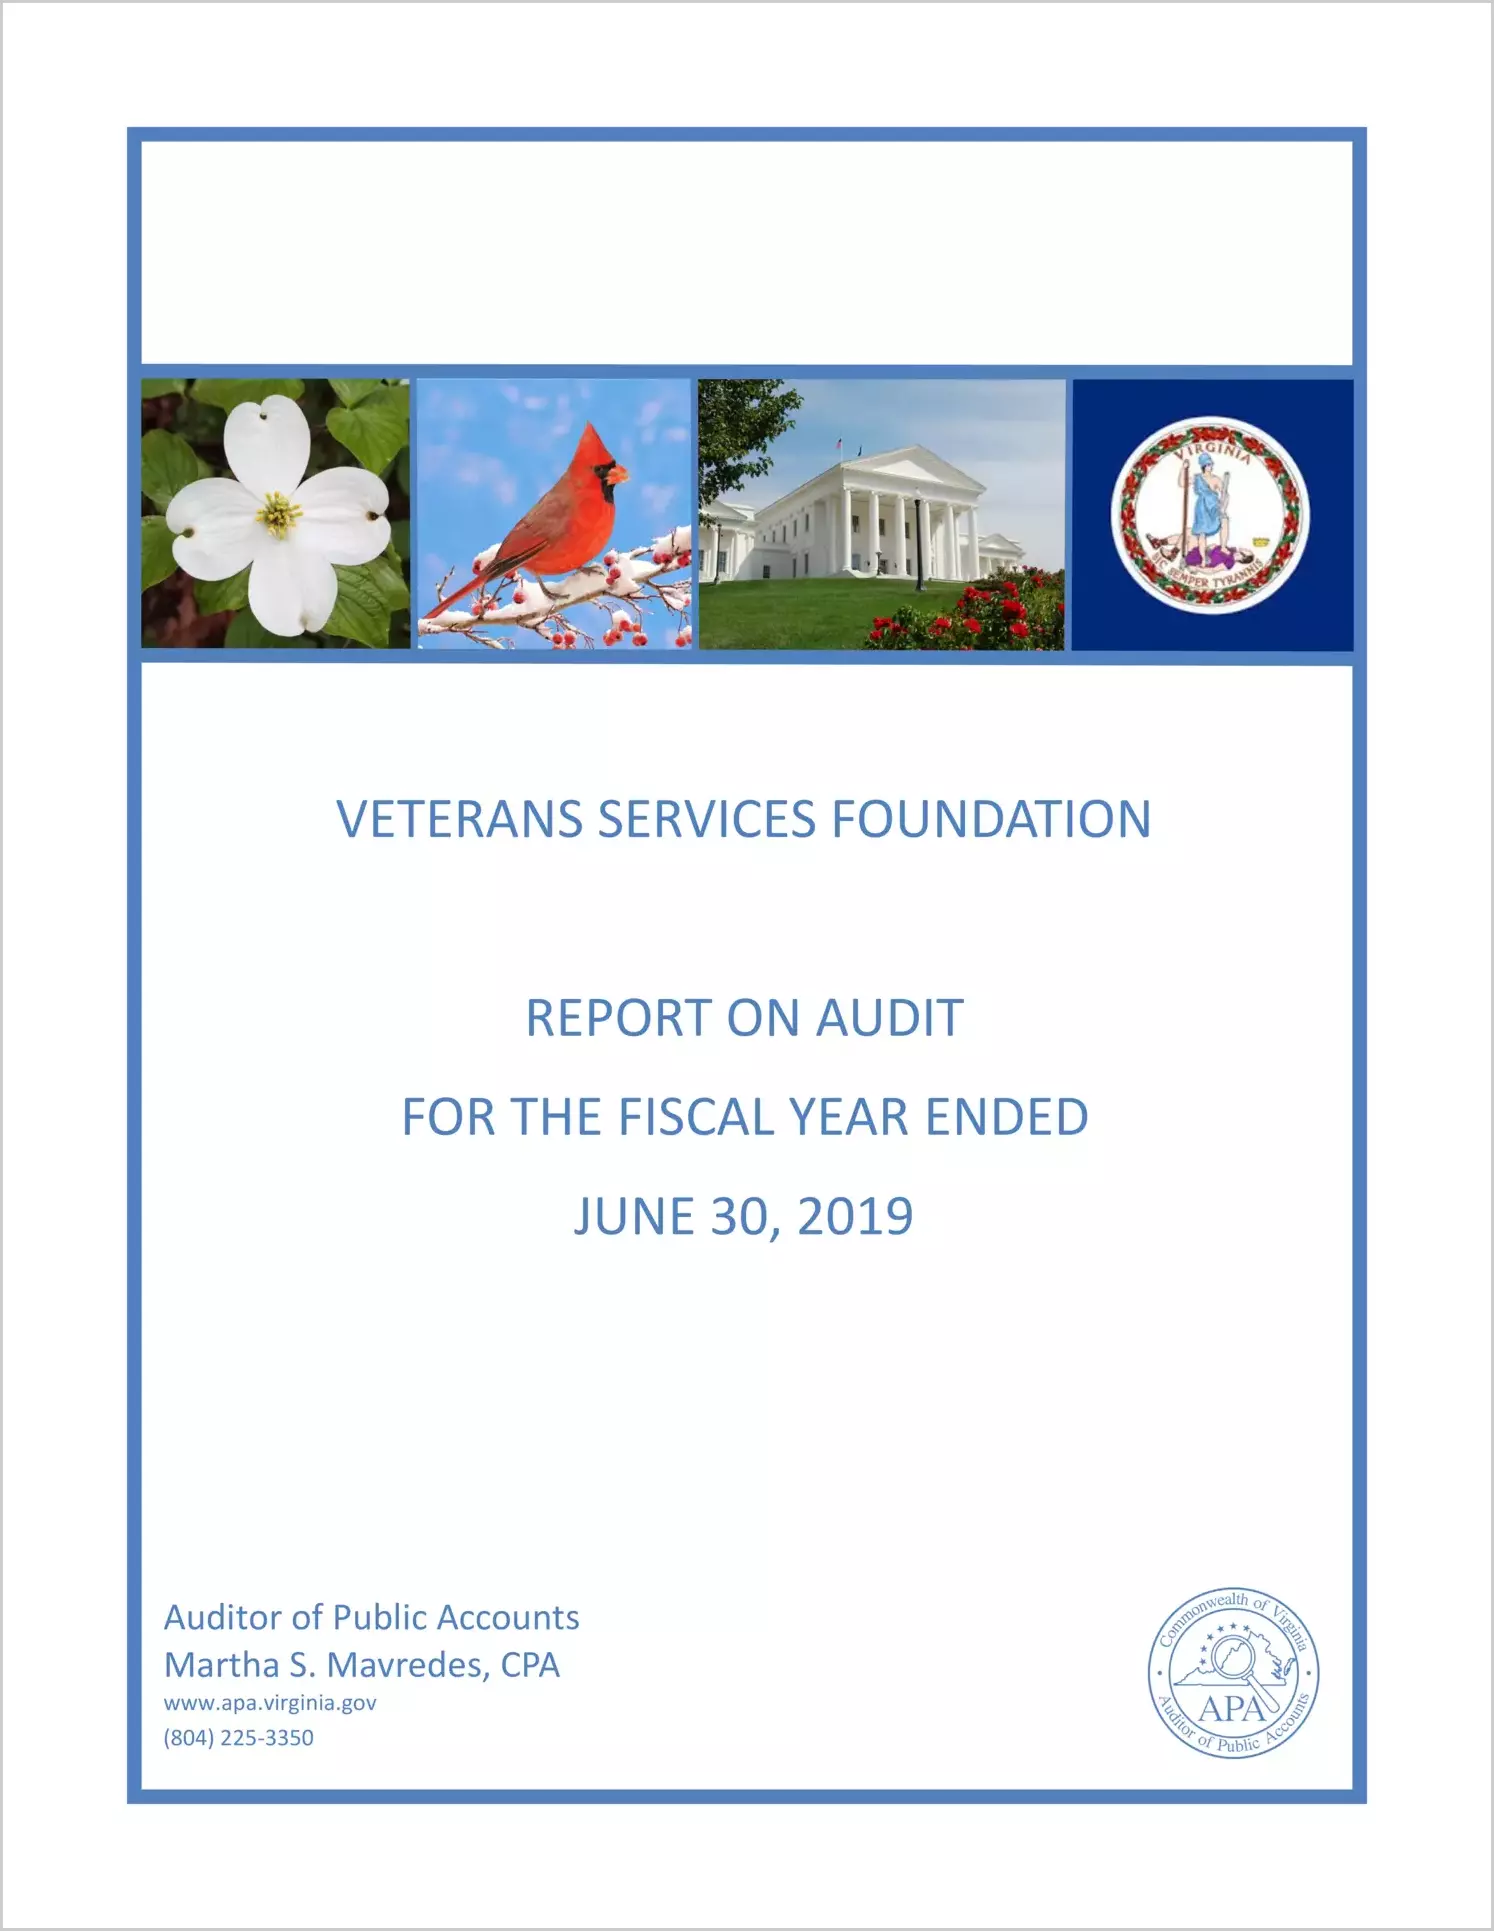 Veterans Services Foundation for the fiscal year ended June 30, 2019